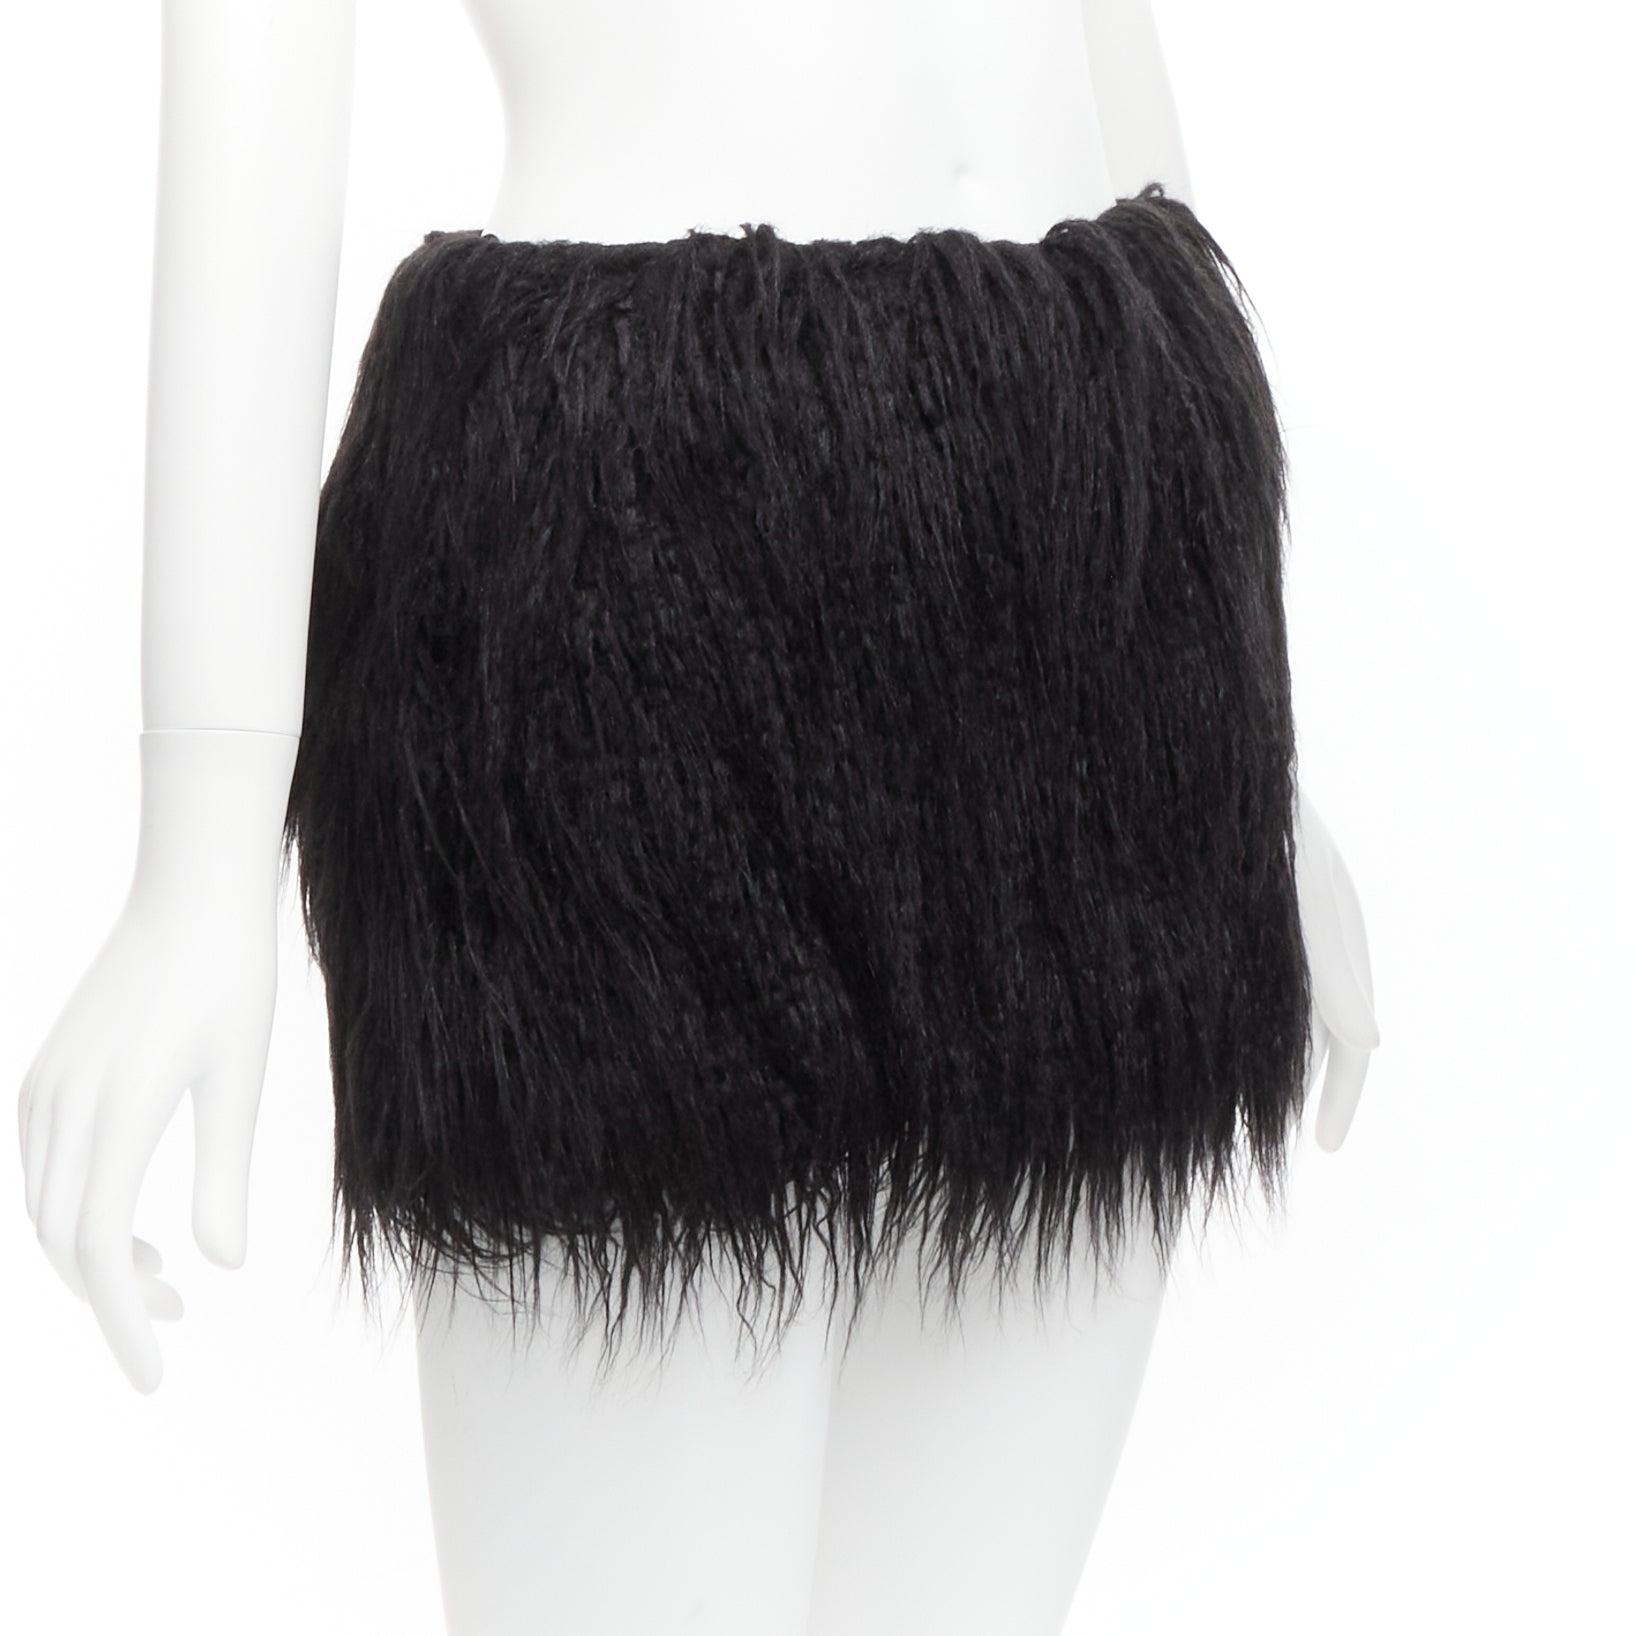 new SAINT LAURENT 2021 Runway black faux fur mini skirt FR34 XS
Reference: TGAS/D00741
Brand: Saint Laurent
Designer: Anthony Vaccarello
Collectiaon: 2021 - Runway
Material: Faux Fur
Color: Black
Pattern: Solid
Closure: Snap Buttons
Lining: Black